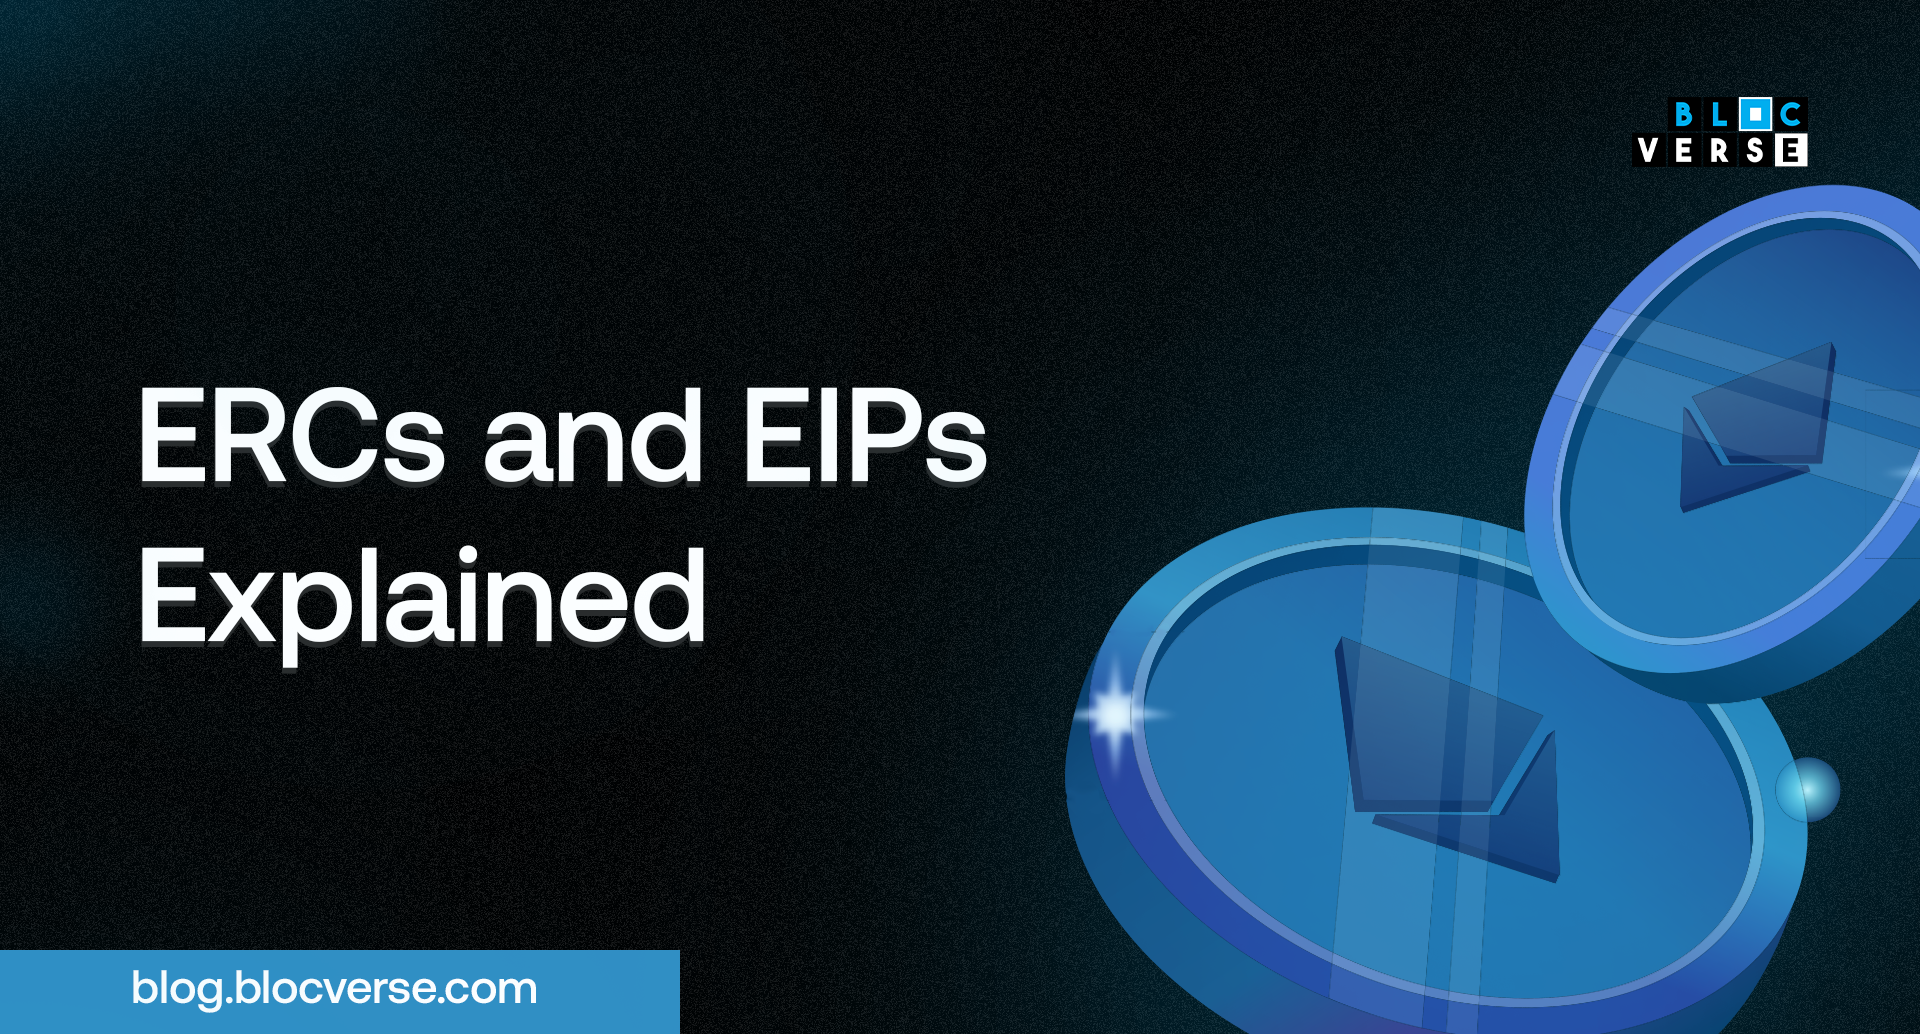 ERCs and EIPs Explained